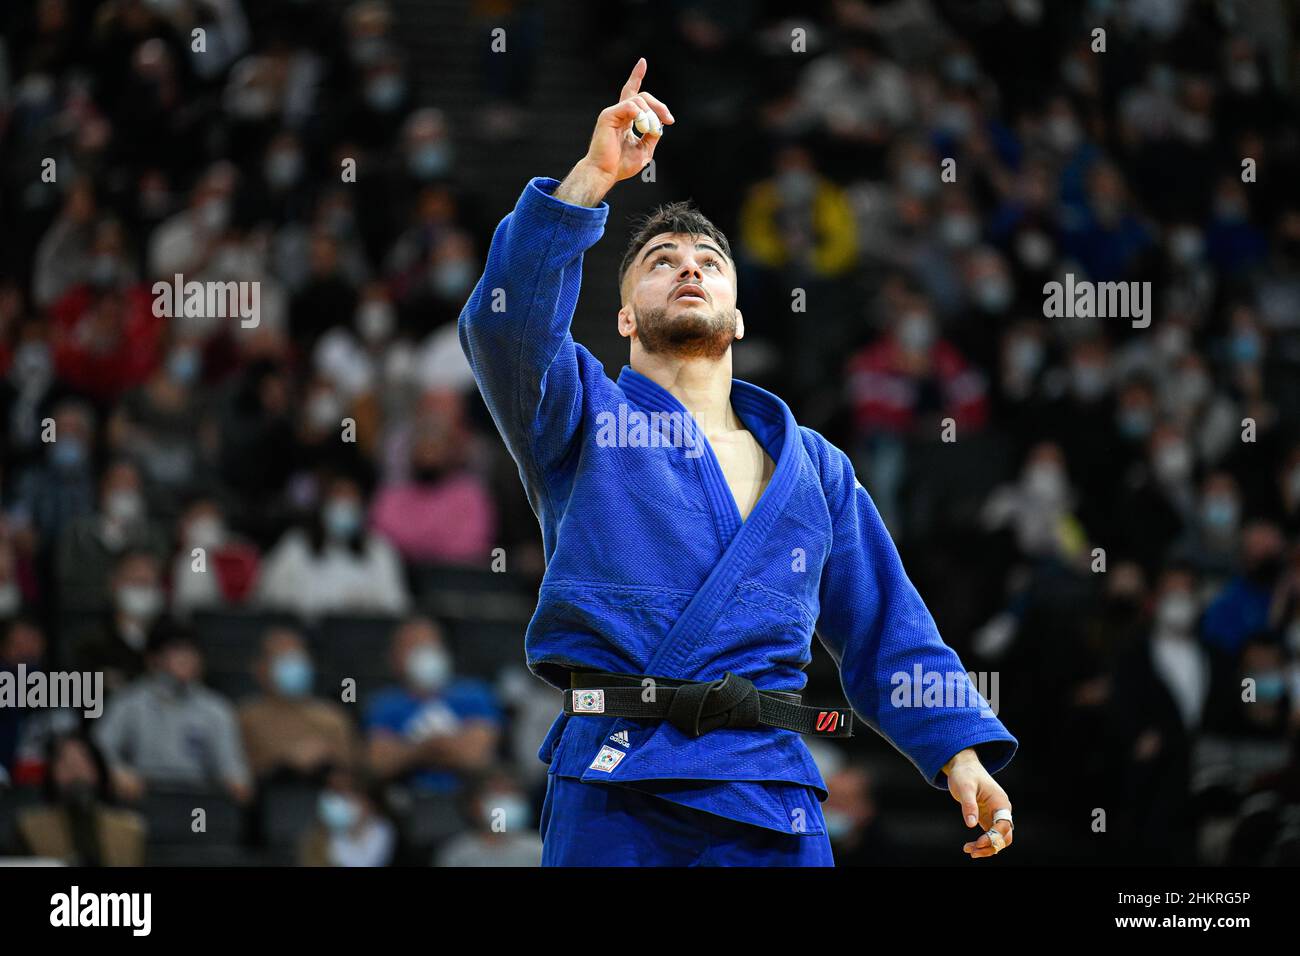 Men's -73 kg, Fabio Basile of Italy competes and celebrates during the Paris Grand Slam 2022, IJF World Judo Tour on February 5, 2022 at Accor Arena in Paris, France - Photo Victor Joly / DPPI Stock Photo